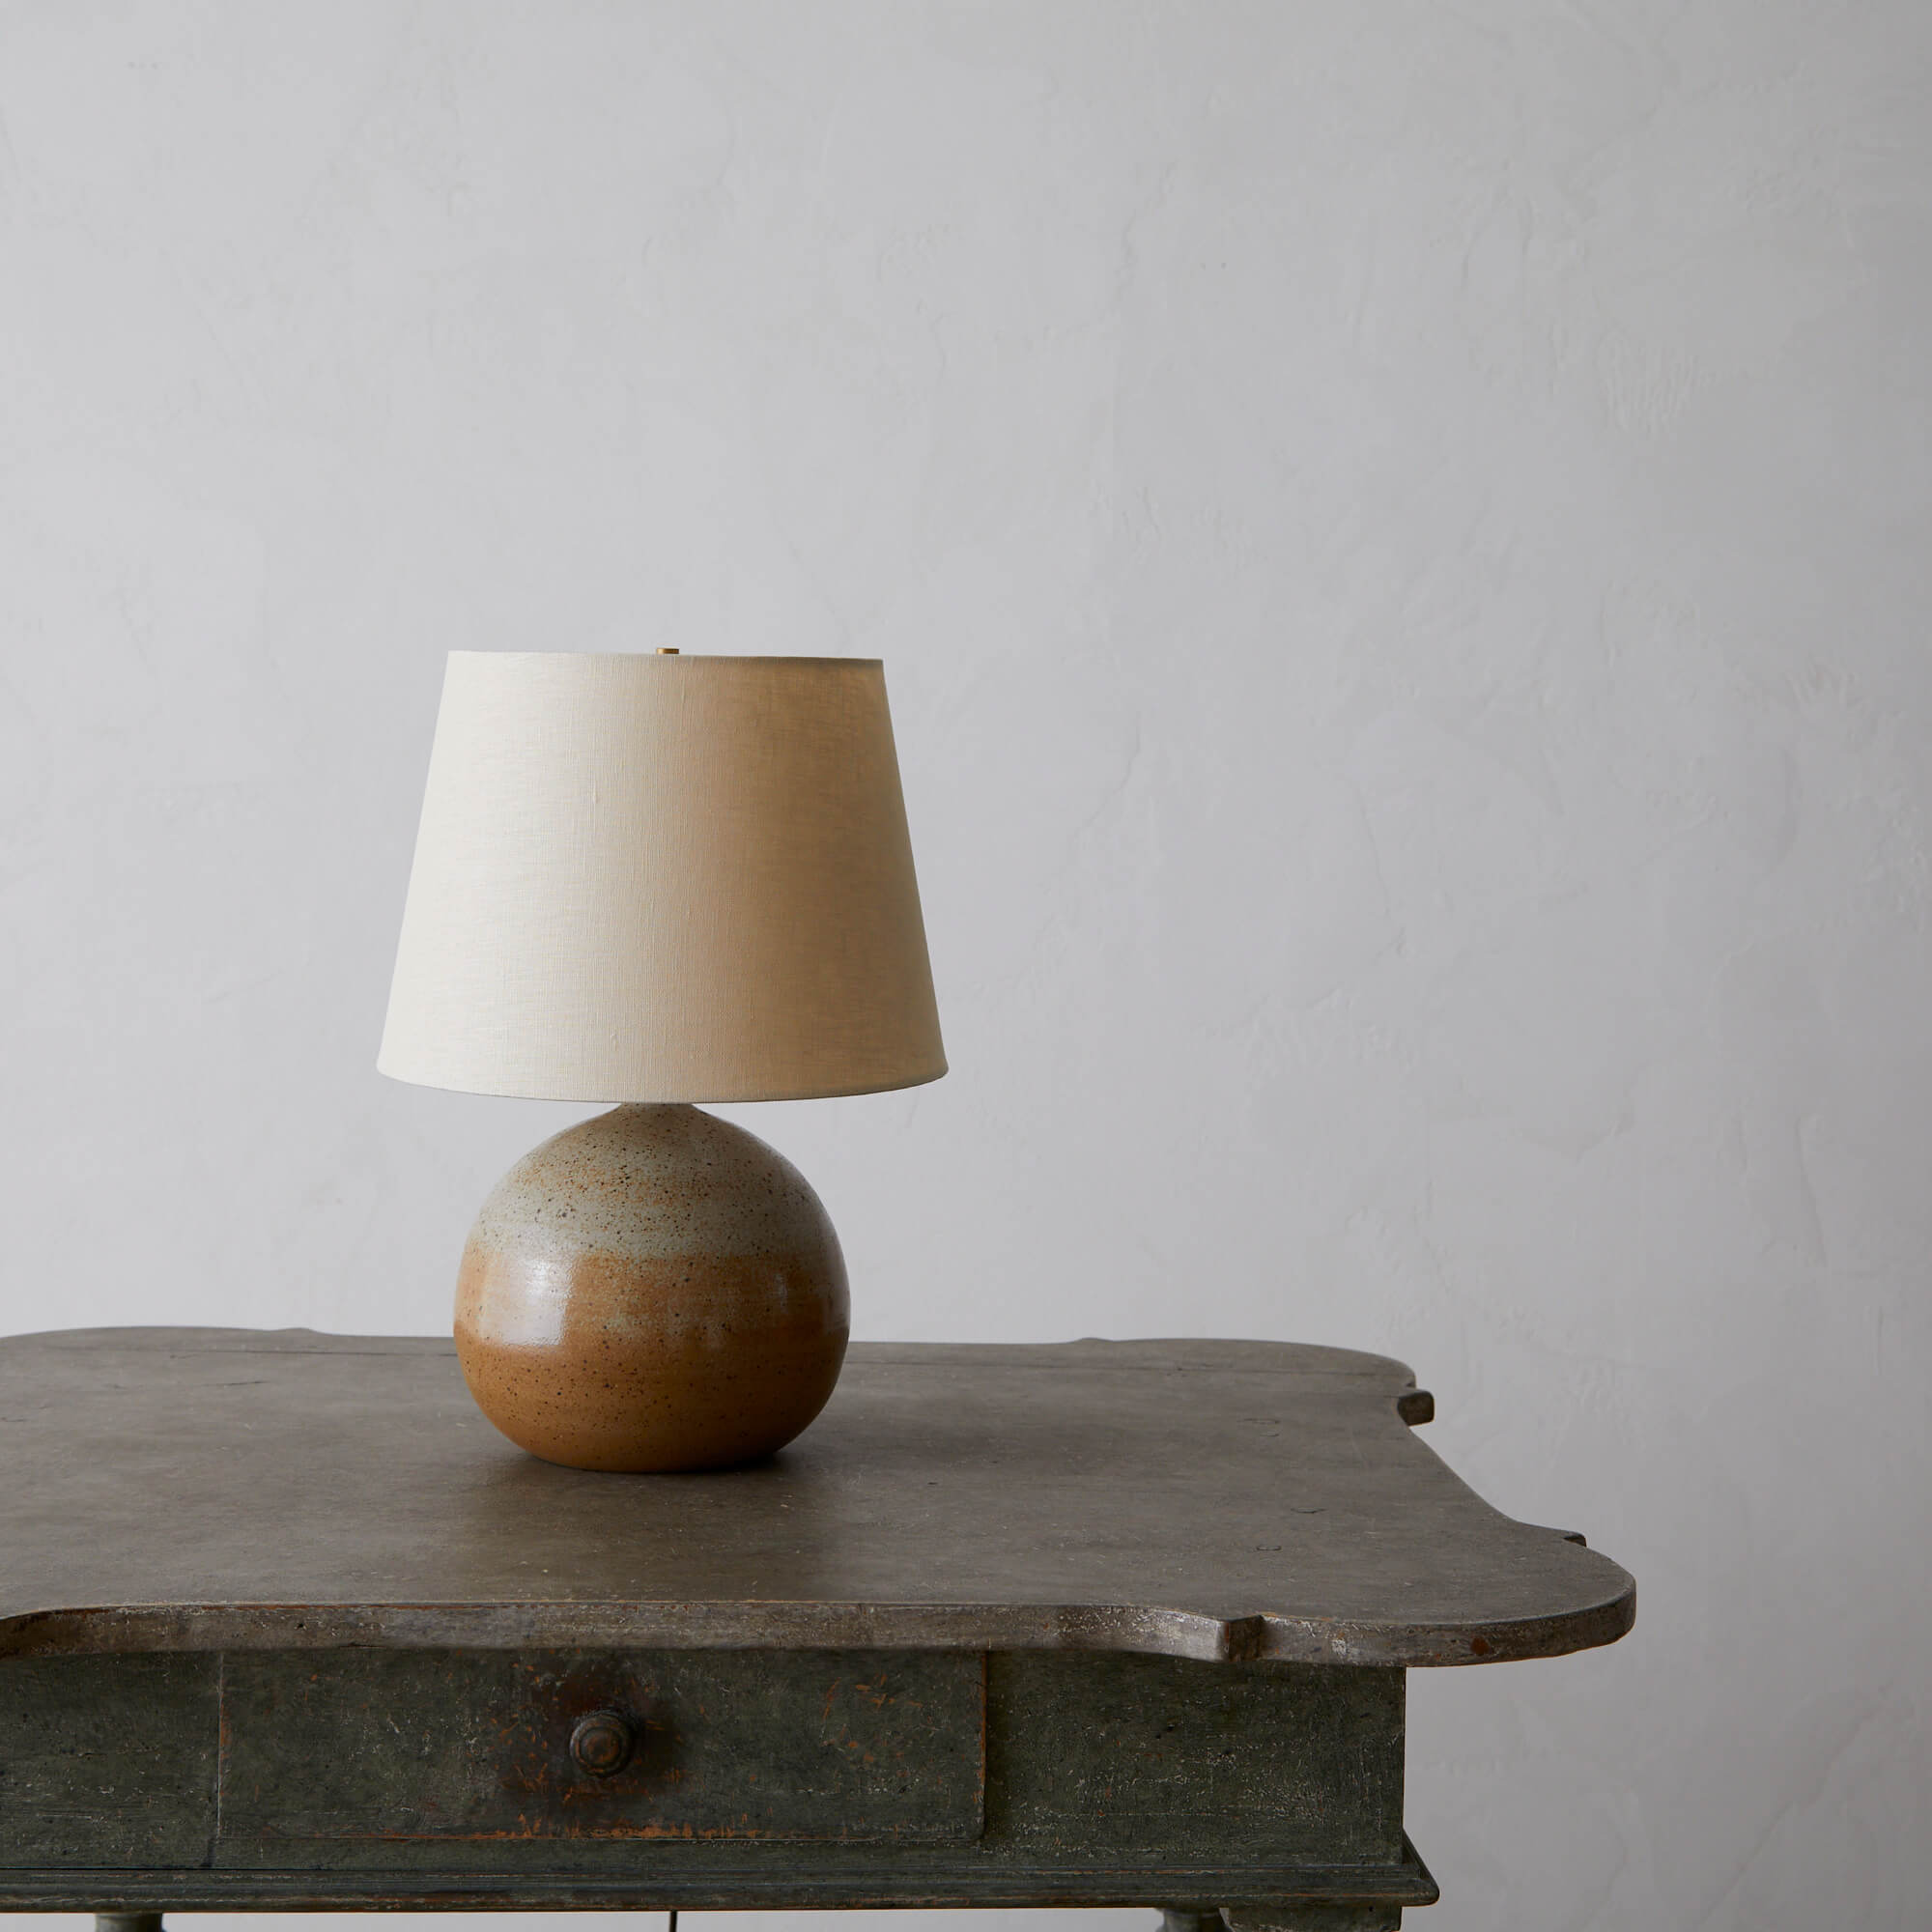 French ceramic table lamp